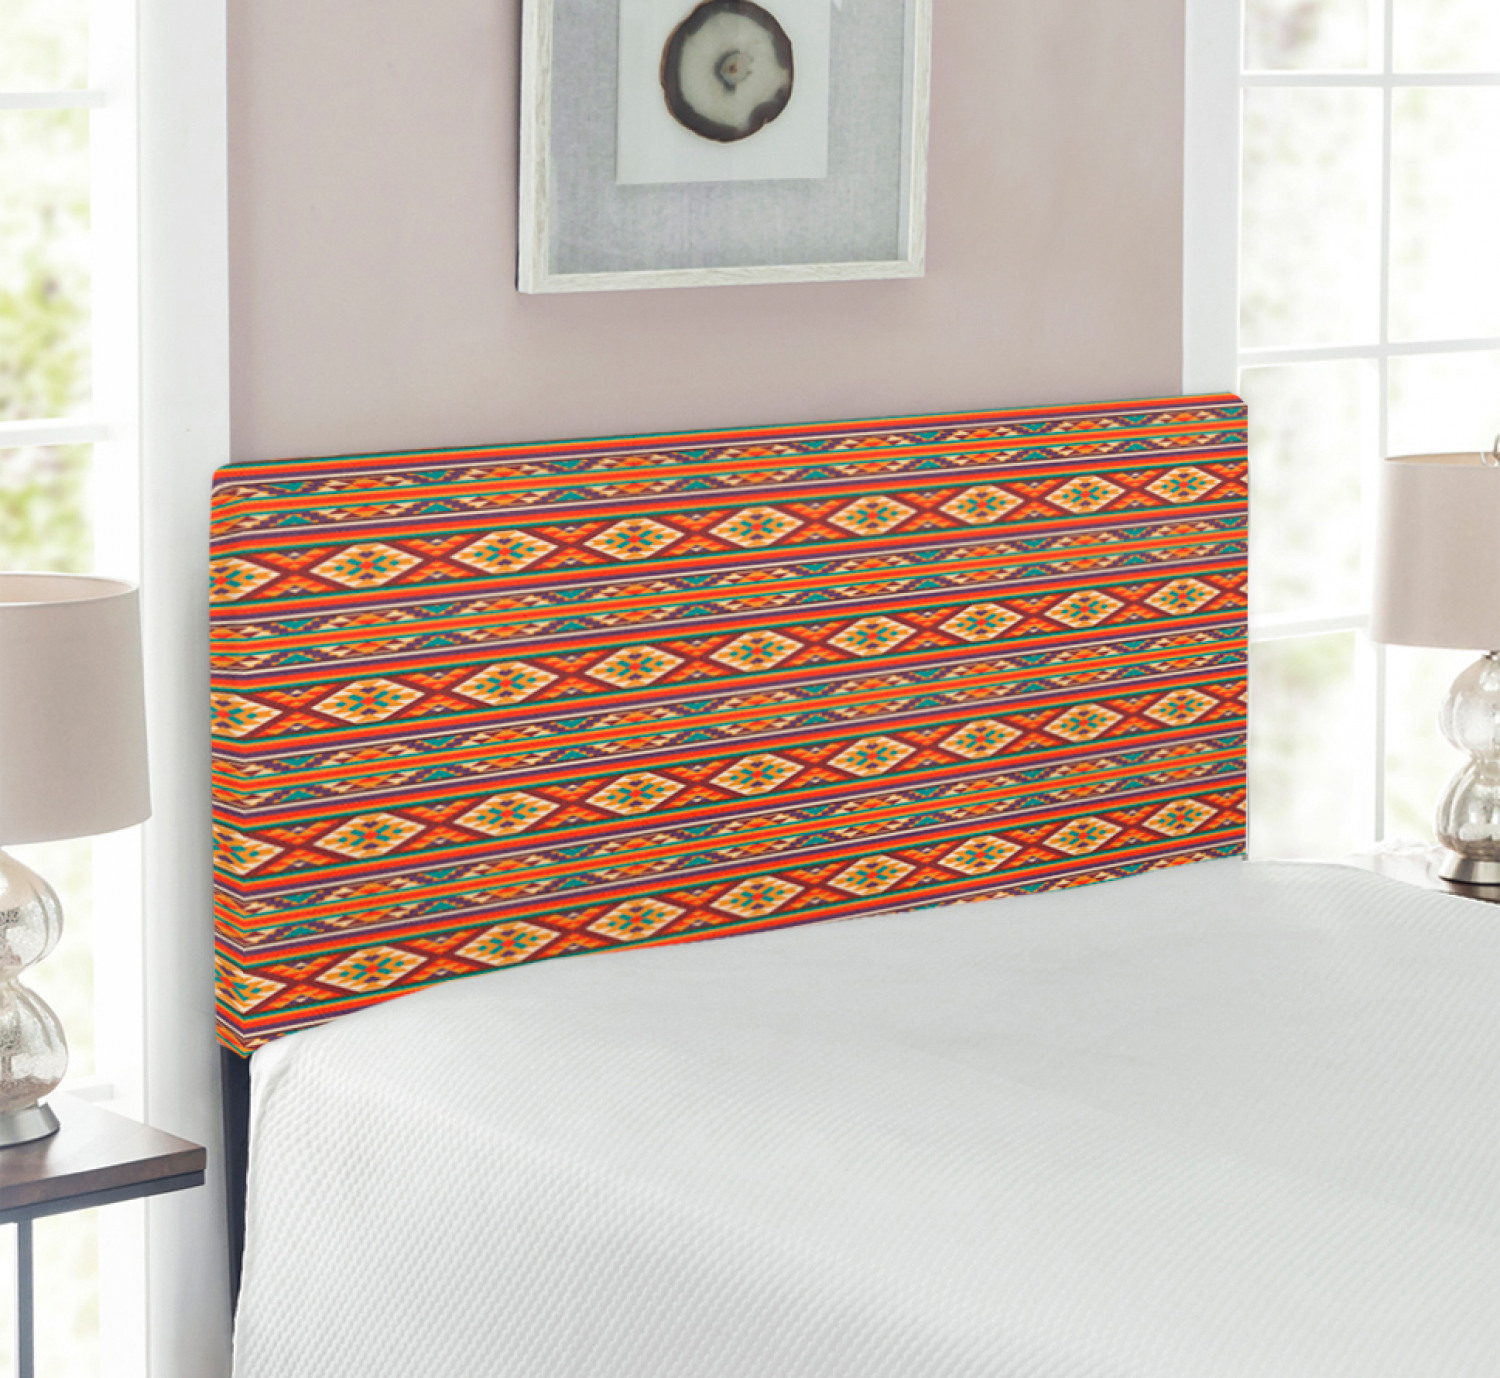 Colorful Headboard, Mosaic Inspired Horizontal Lines with Graphic Design, Upholstered Decorative Metal Bed Headboard with Memory Foam, Twin Size, Multicolor, by Ambesonne - image 2 of 4